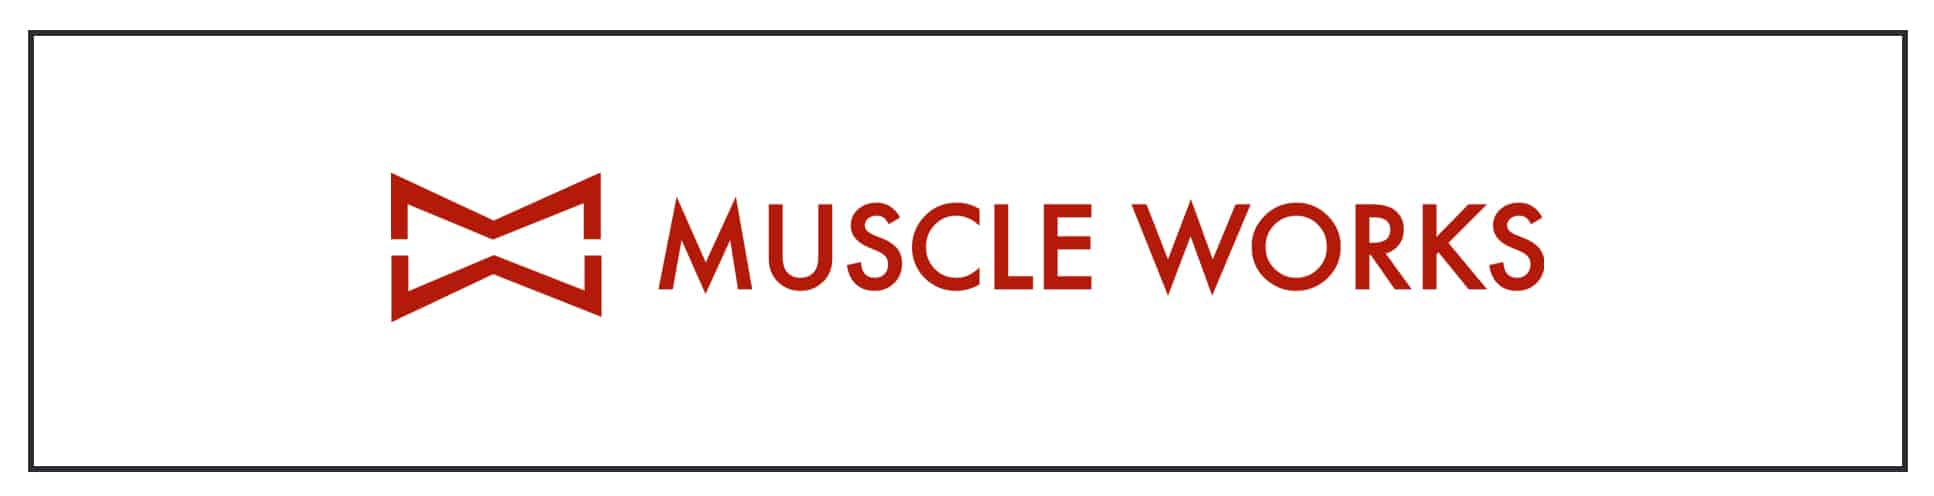 Muscle works logo on a white background.